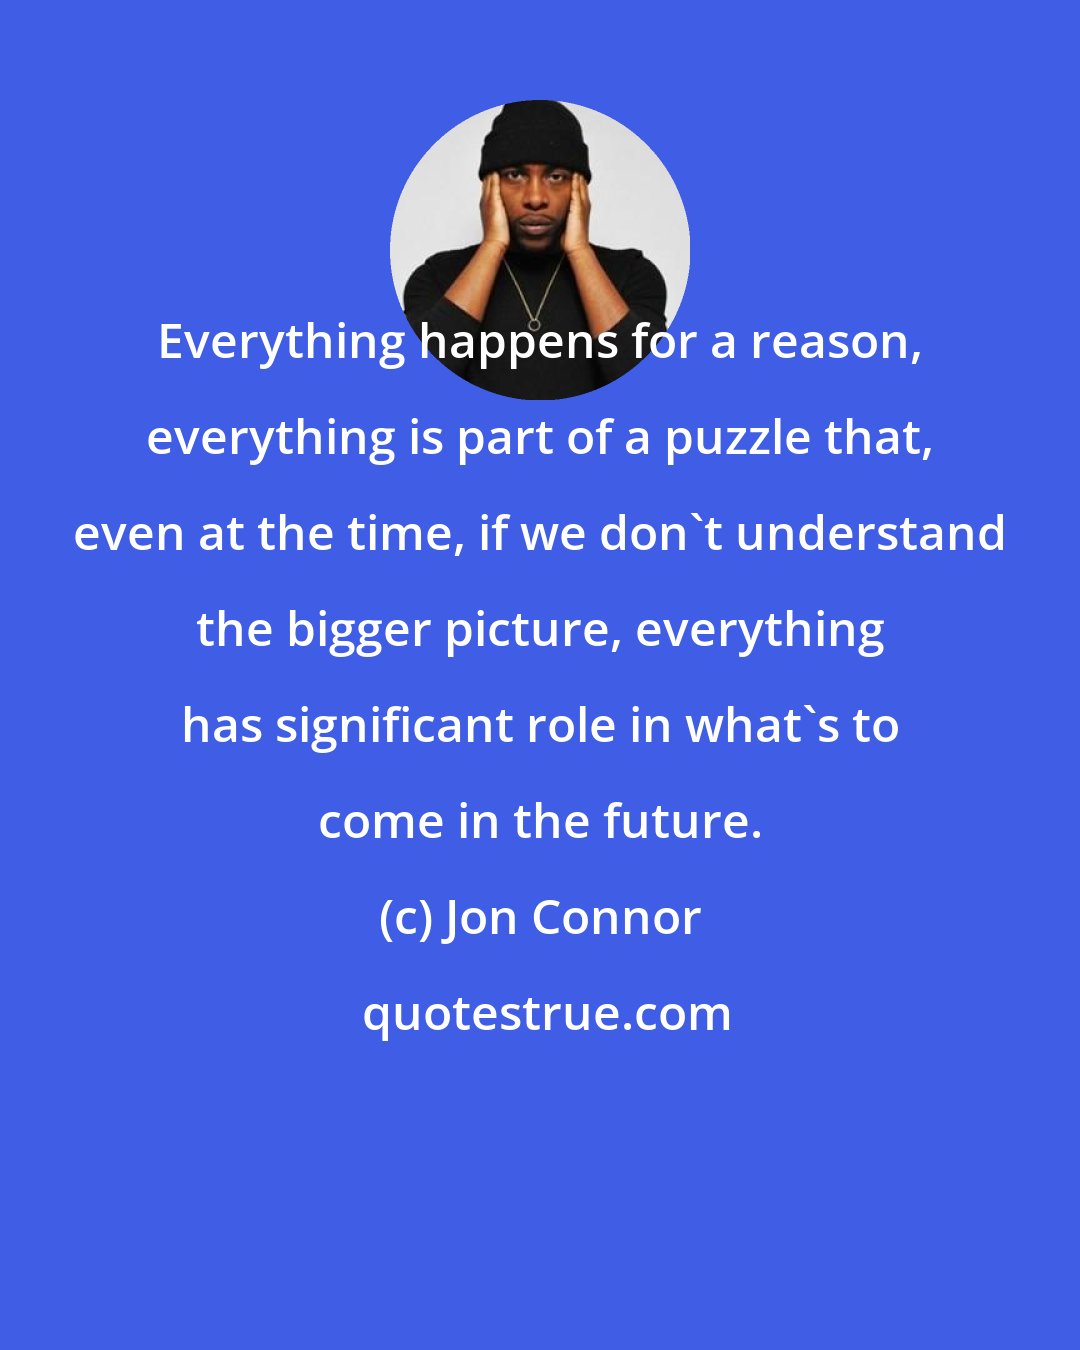 Jon Connor: Everything happens for a reason, everything is part of a puzzle that, even at the time, if we don't understand the bigger picture, everything has significant role in what's to come in the future.